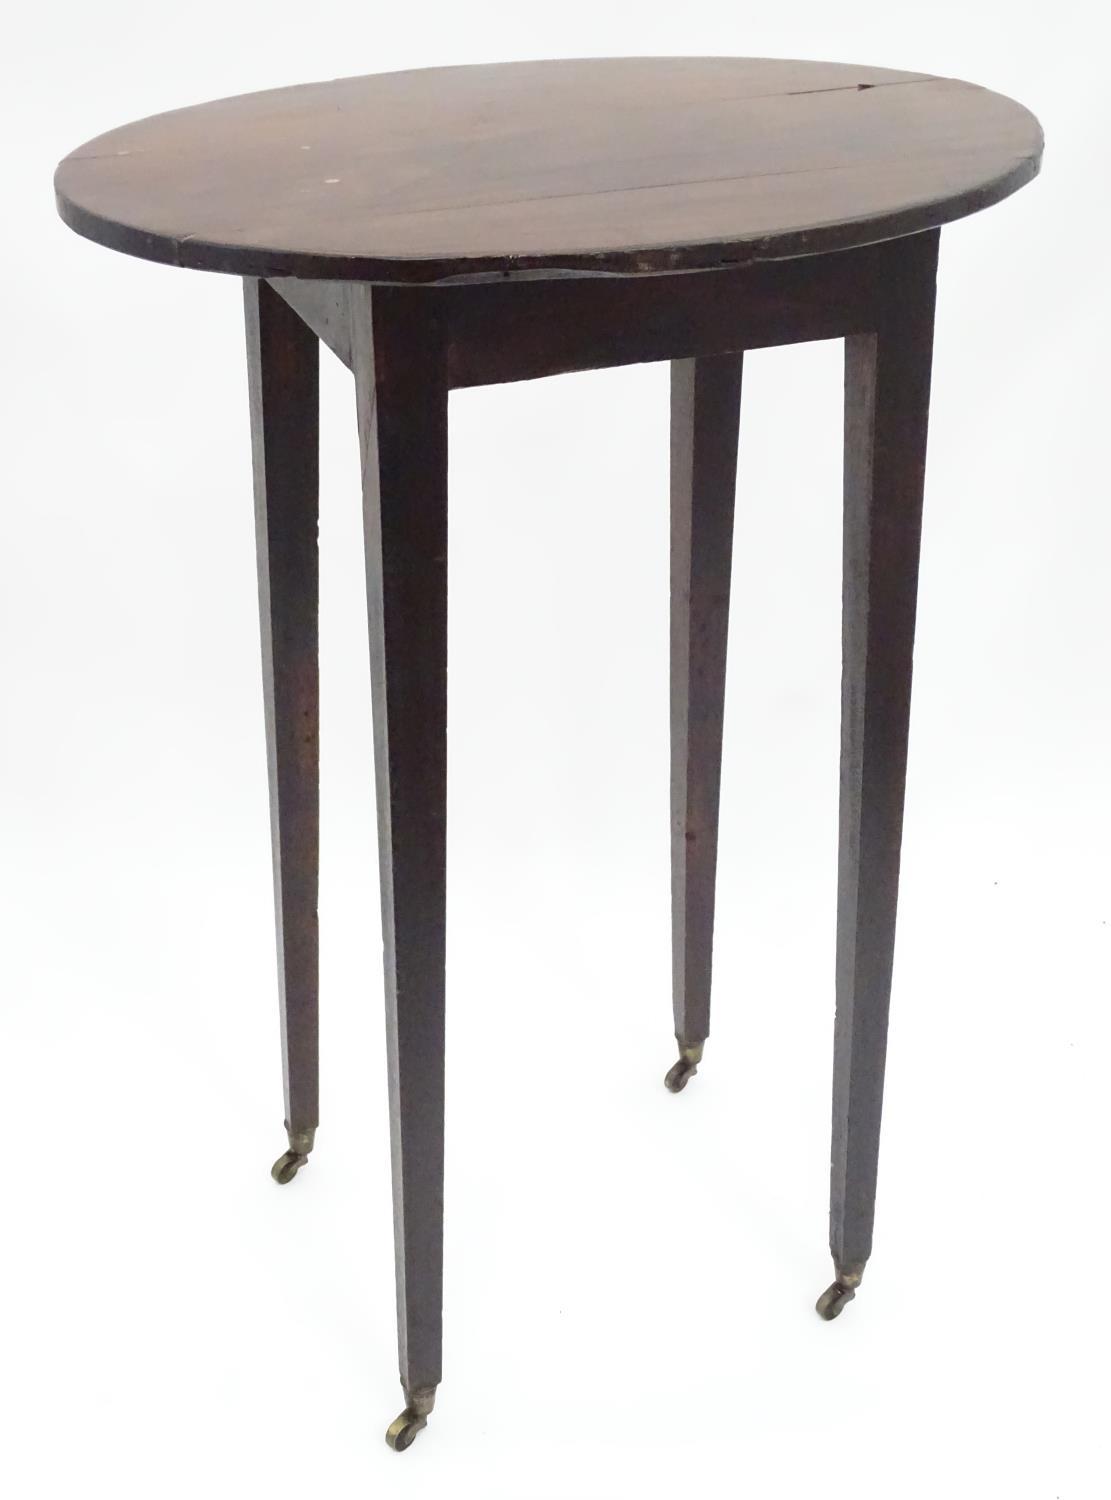 A 19thC mahogany oval occasional table. Approx. 27" tall Please Note - we do not make reference to